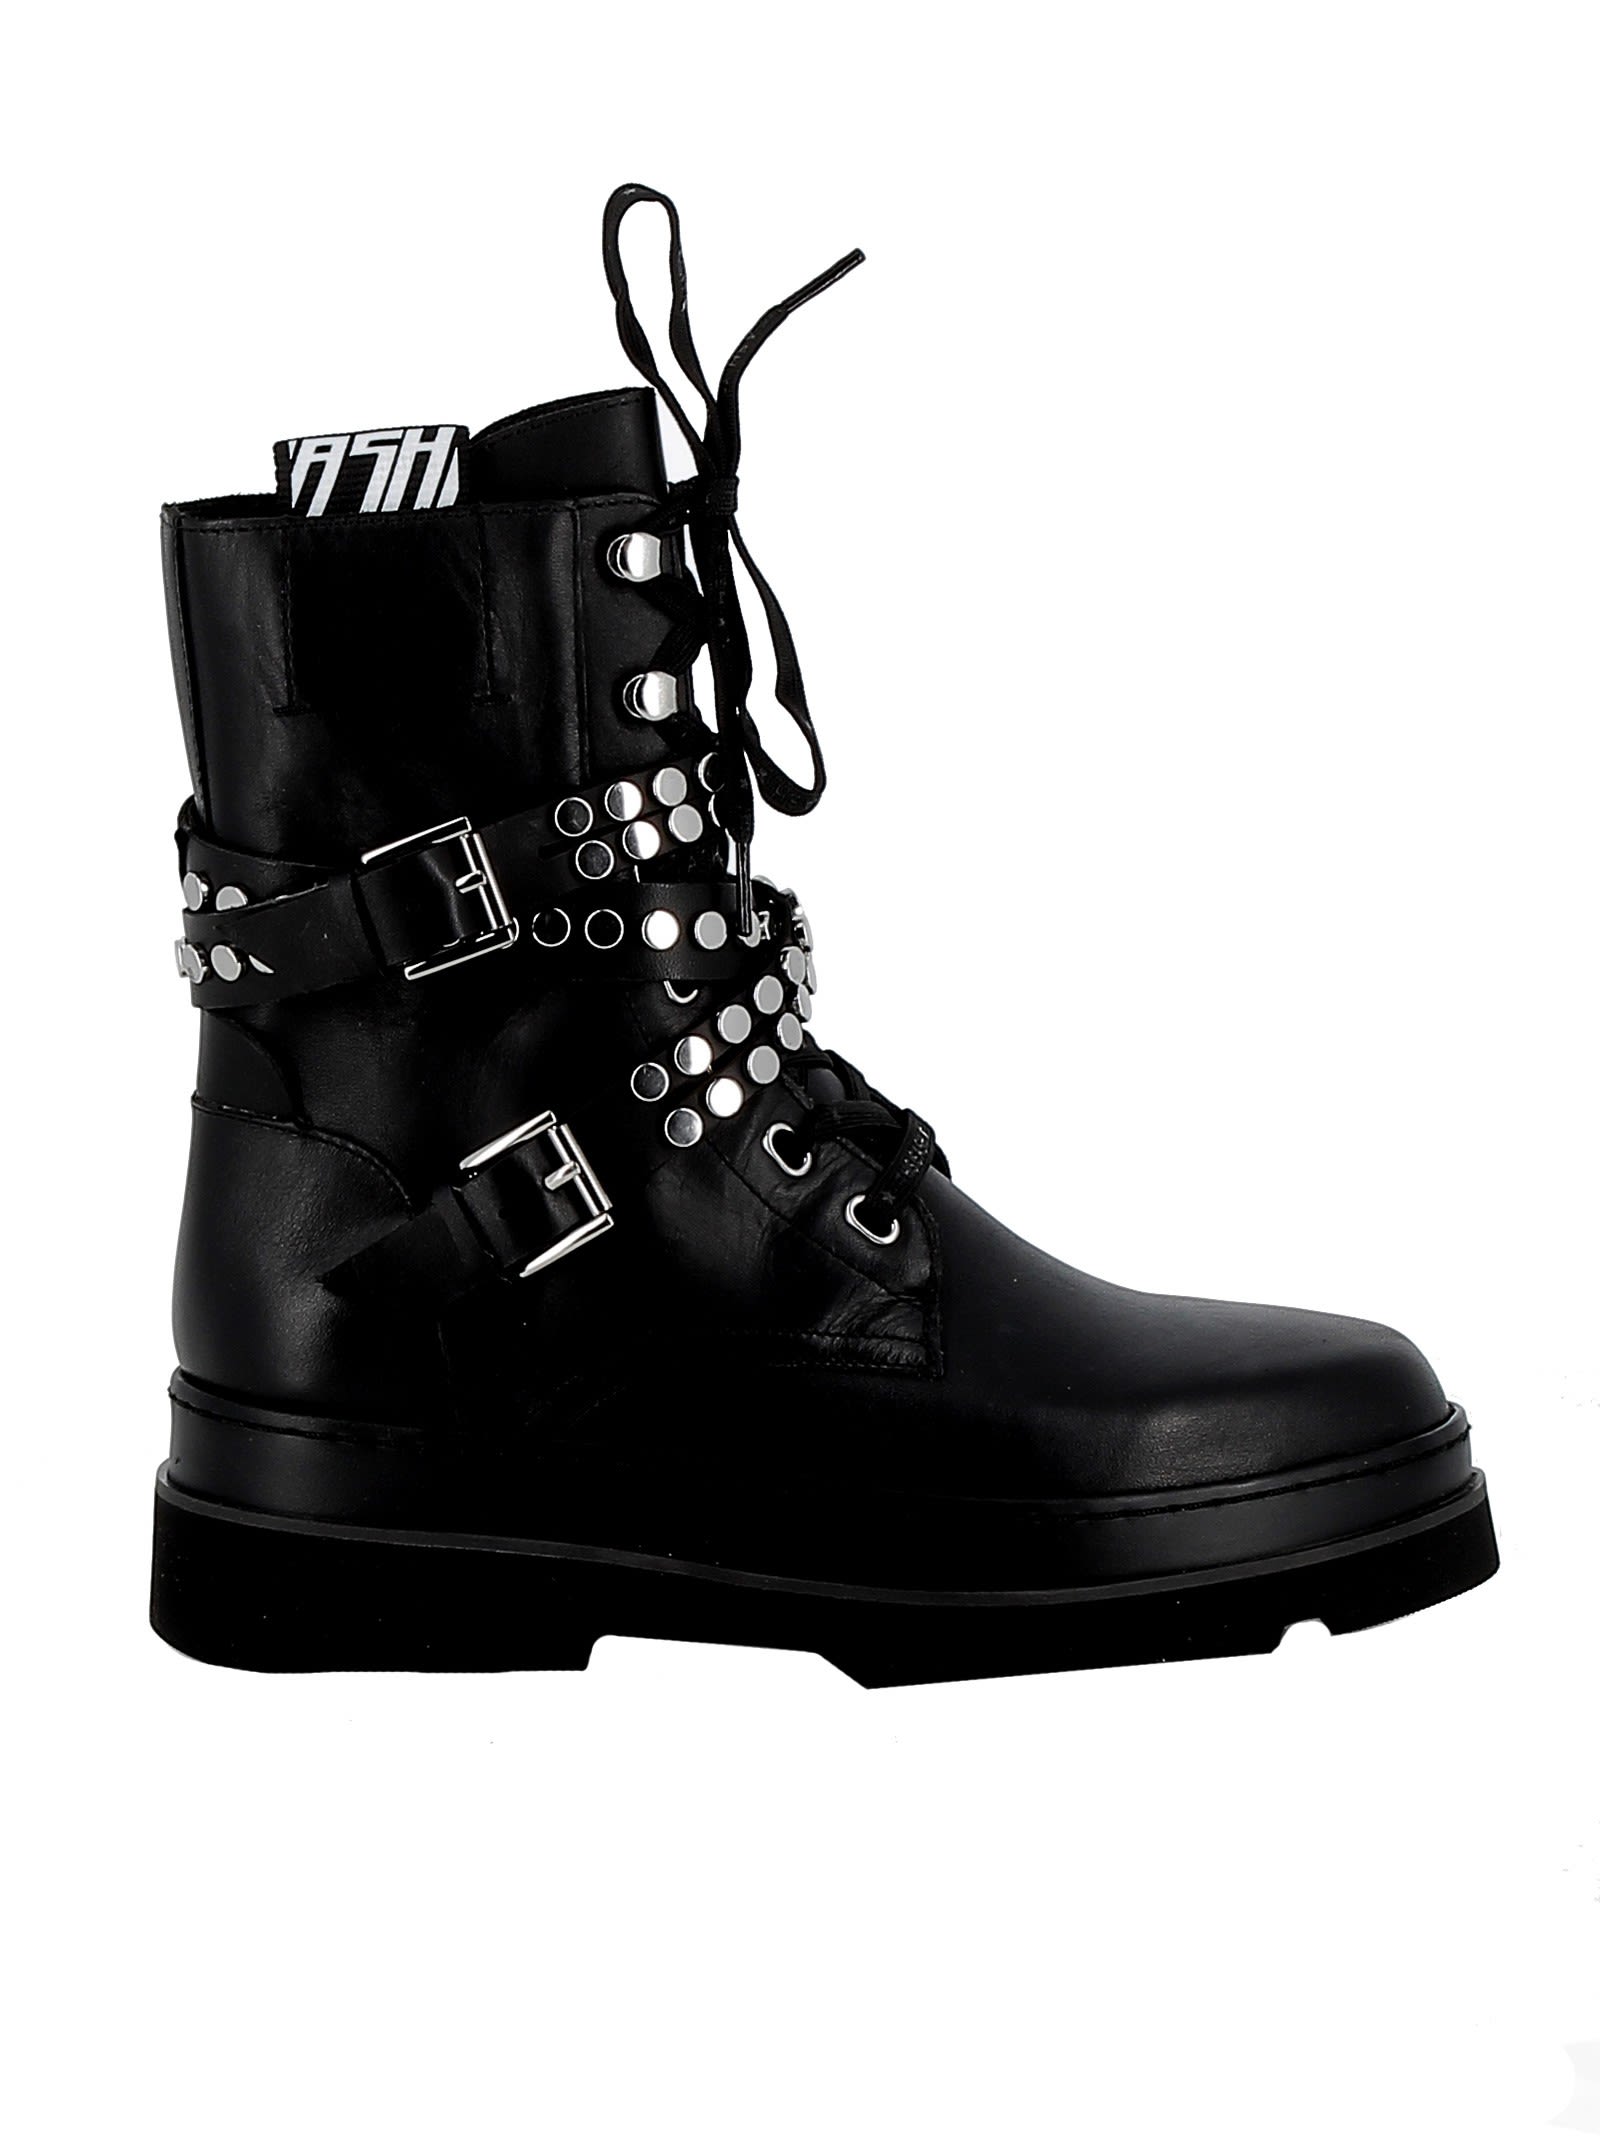 Ash Boots | italist, ALWAYS LIKE A SALE